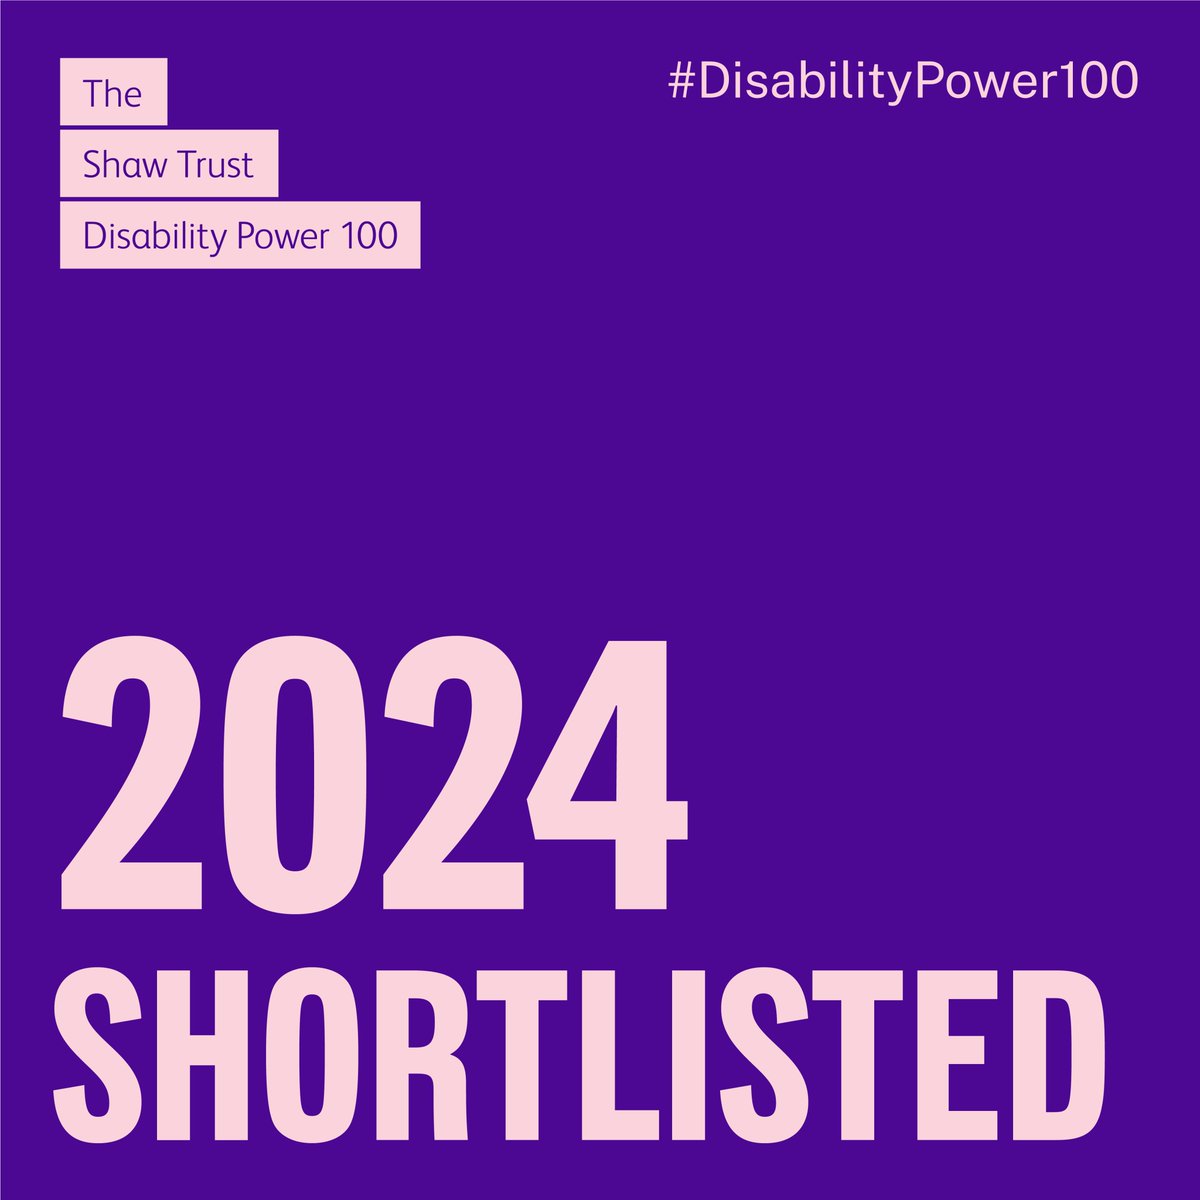 Hurray! @JoONeil12 and @PonyPonyPony4 have both been shortlisted for the @ShawTrust Disability Power 100. Go team!

#MHHSBD #DisabilityPower100